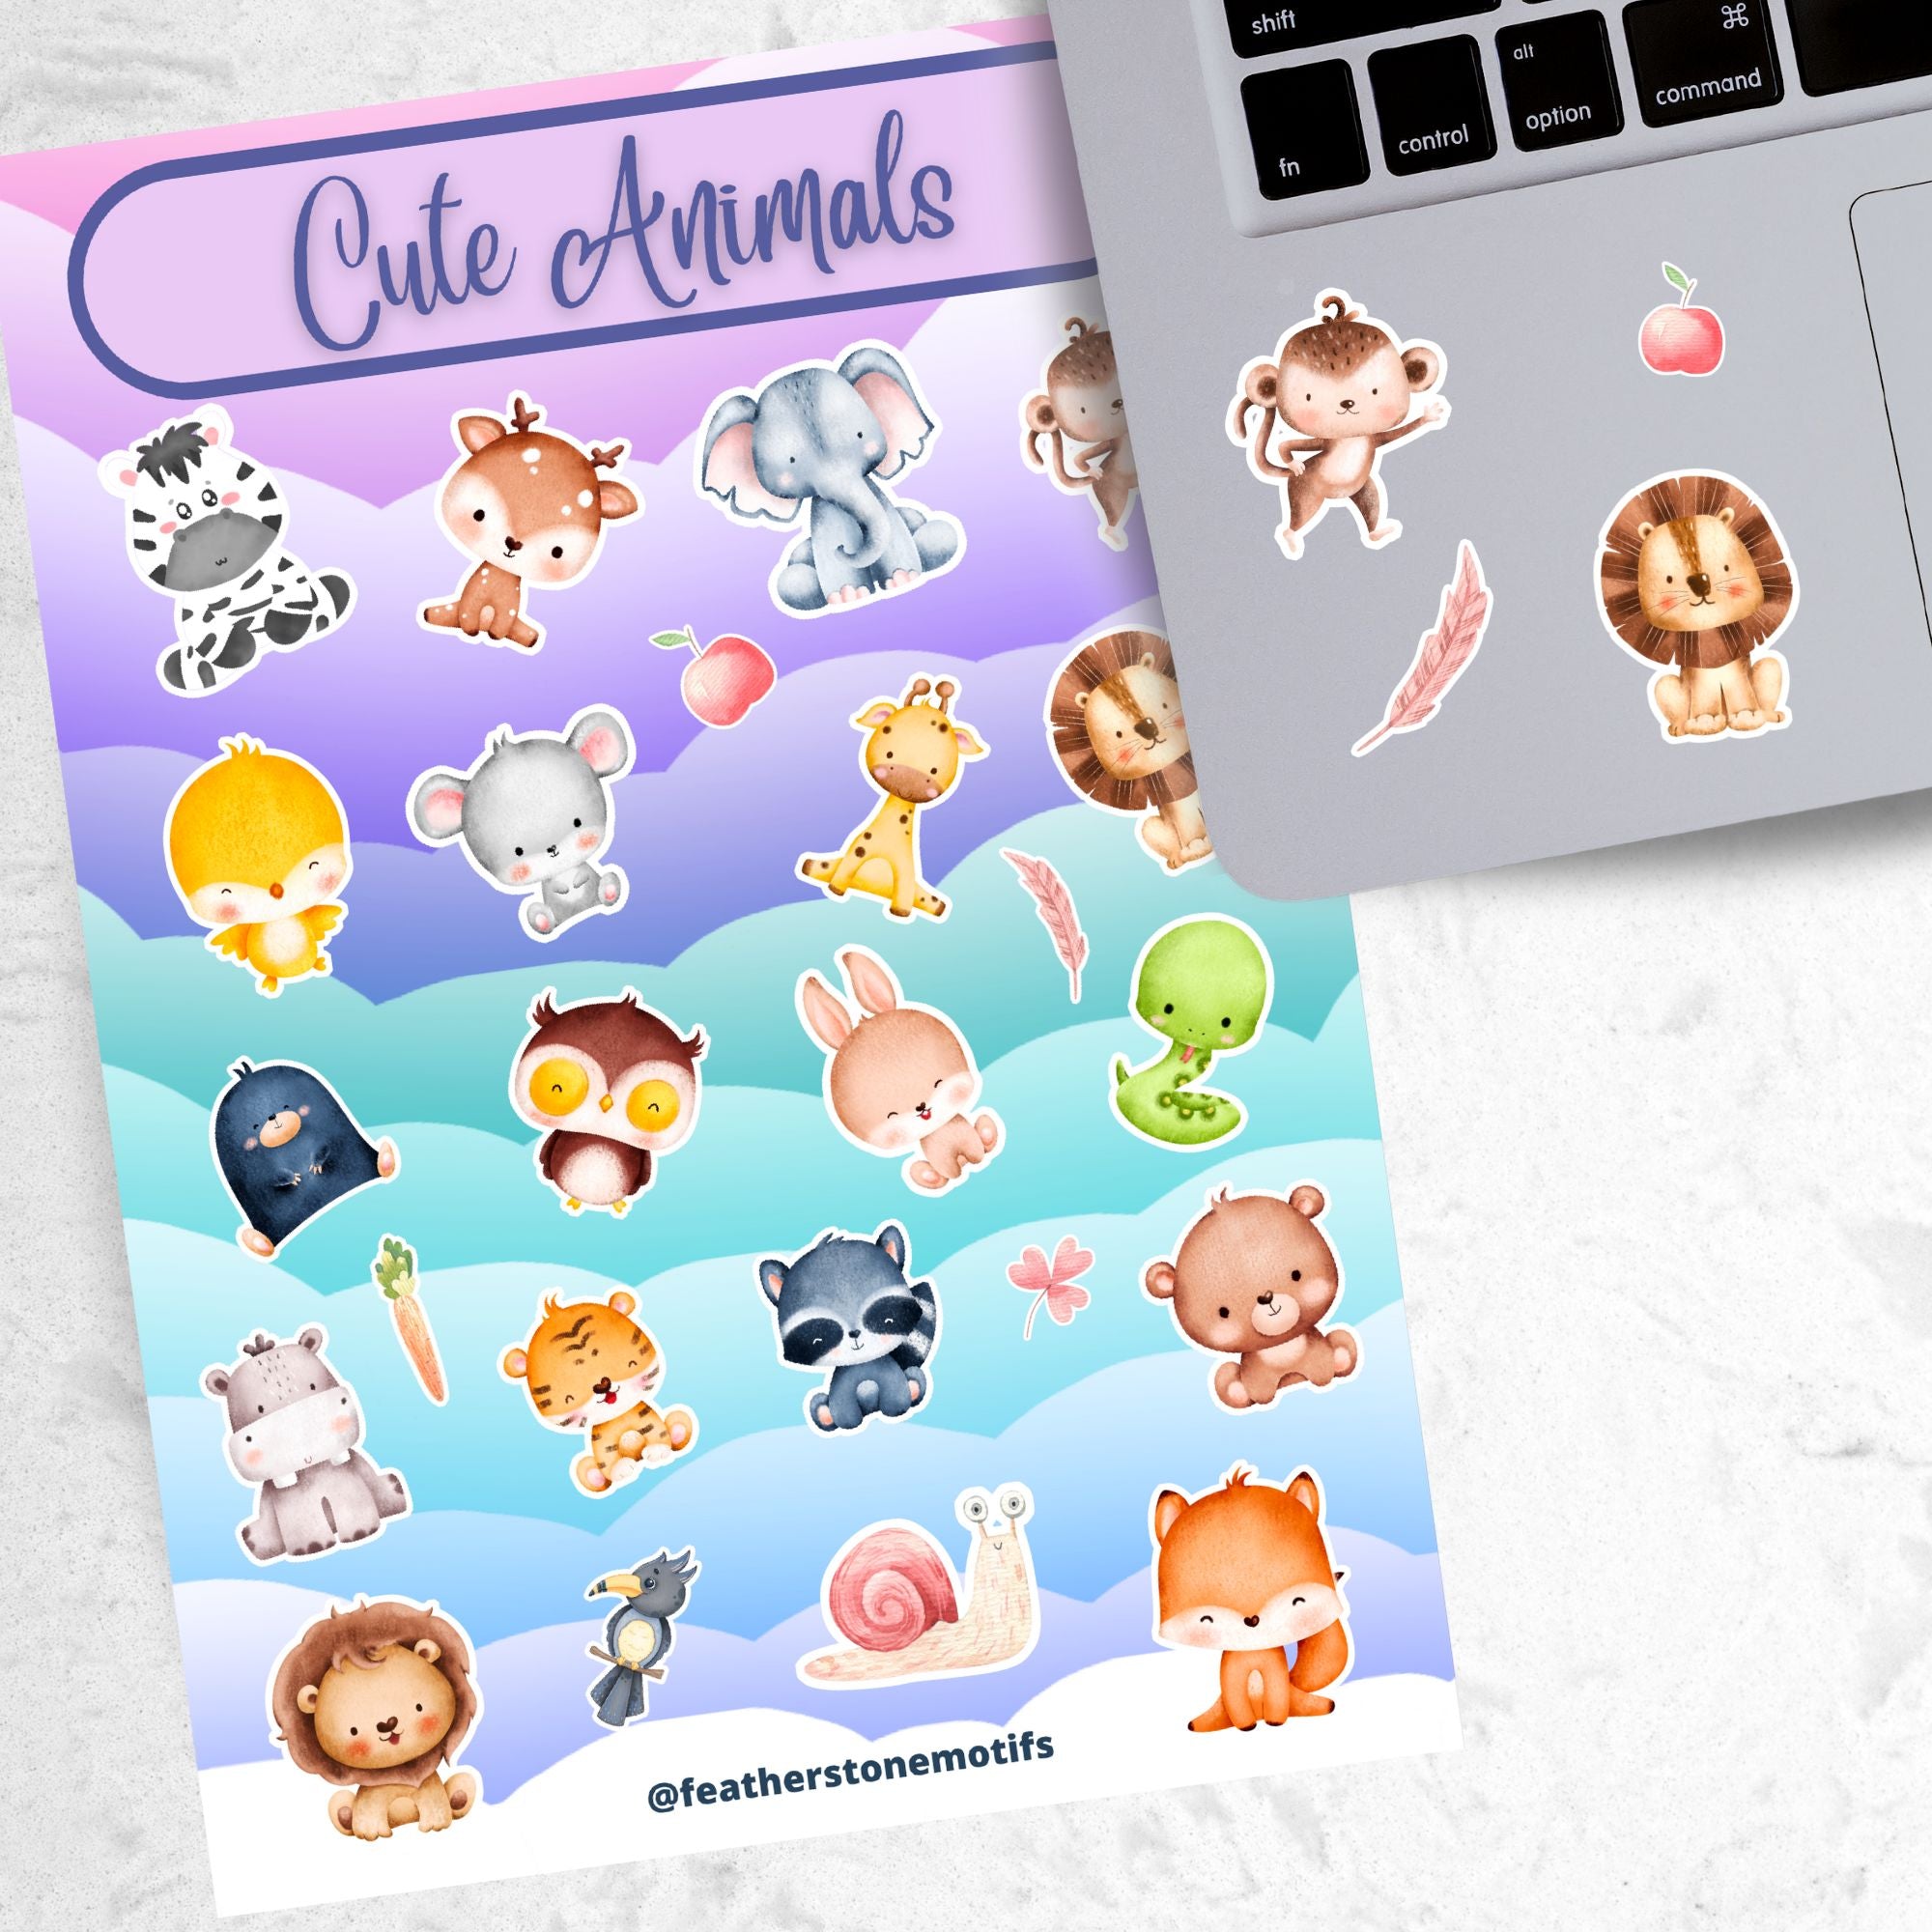 This sticker sheet has a sparkle overlay and it features stickers of cute baby animals from a bear to a zebra, with birds, lions, a monkey, and even snakes and snails in between. This image shows the sticker sheet next to an open laptop with stickers of a monkey, lion, feather, and apple applied below the keyboard.